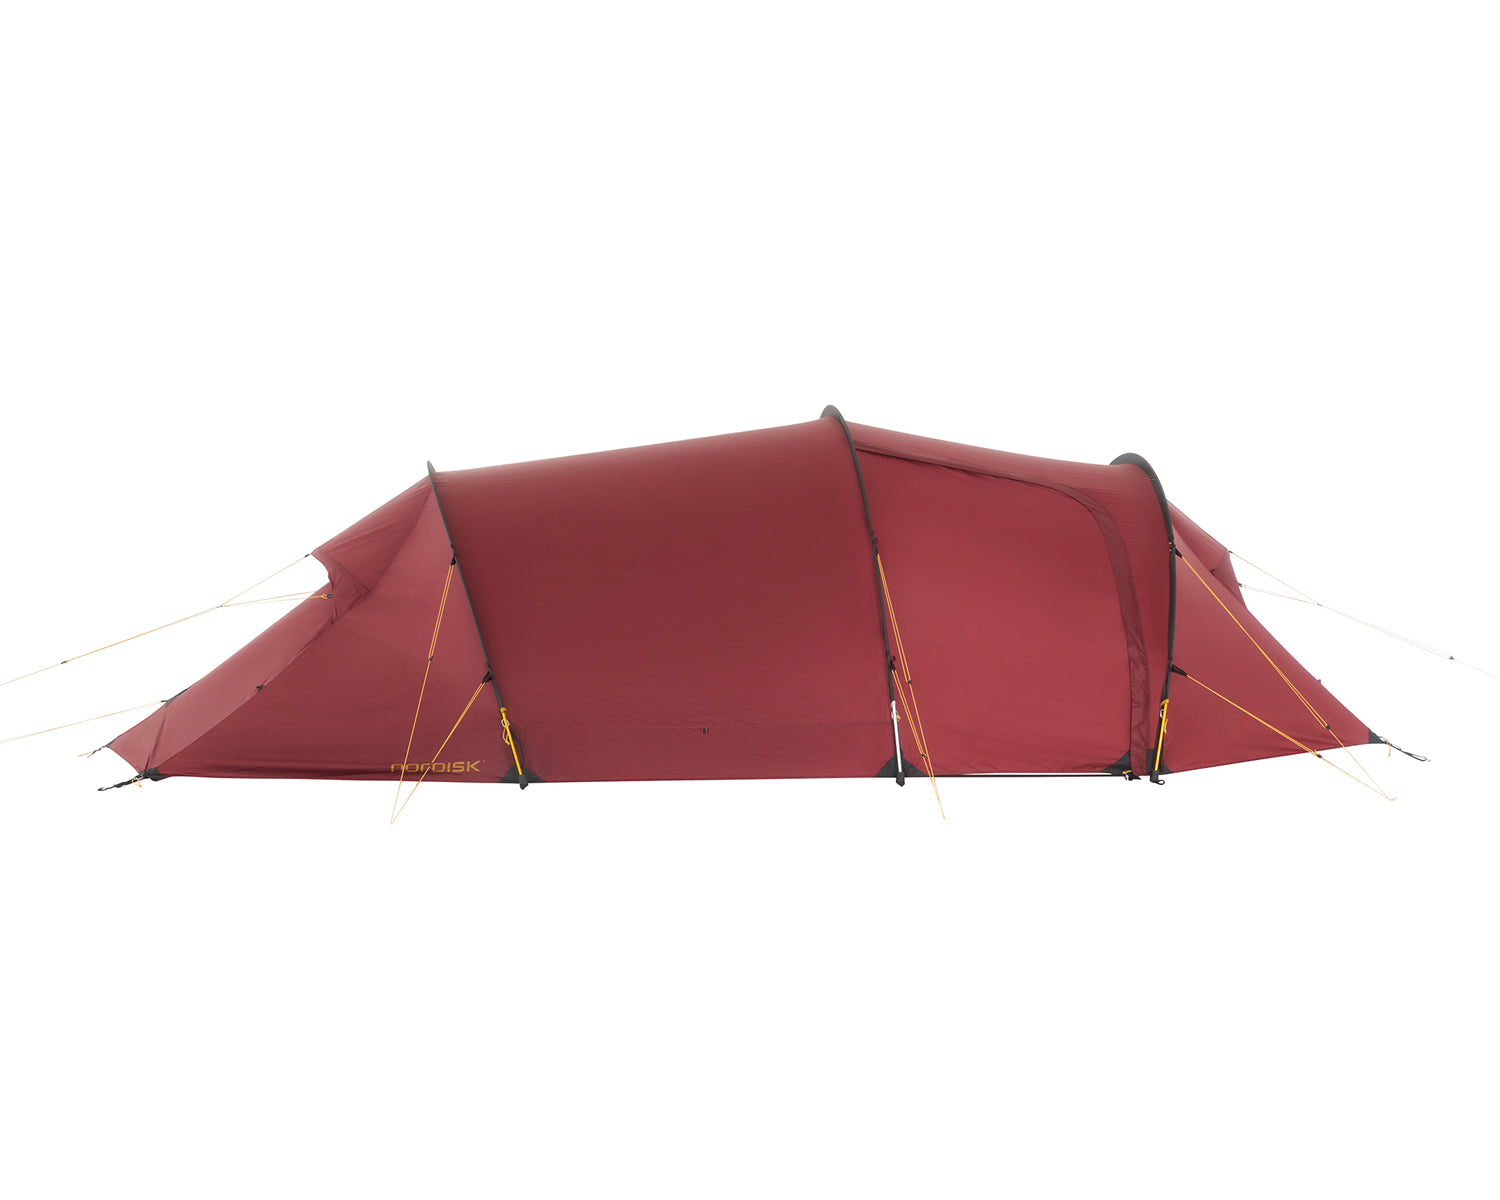 Seiland 3 SP - 3 person - Burnt Red